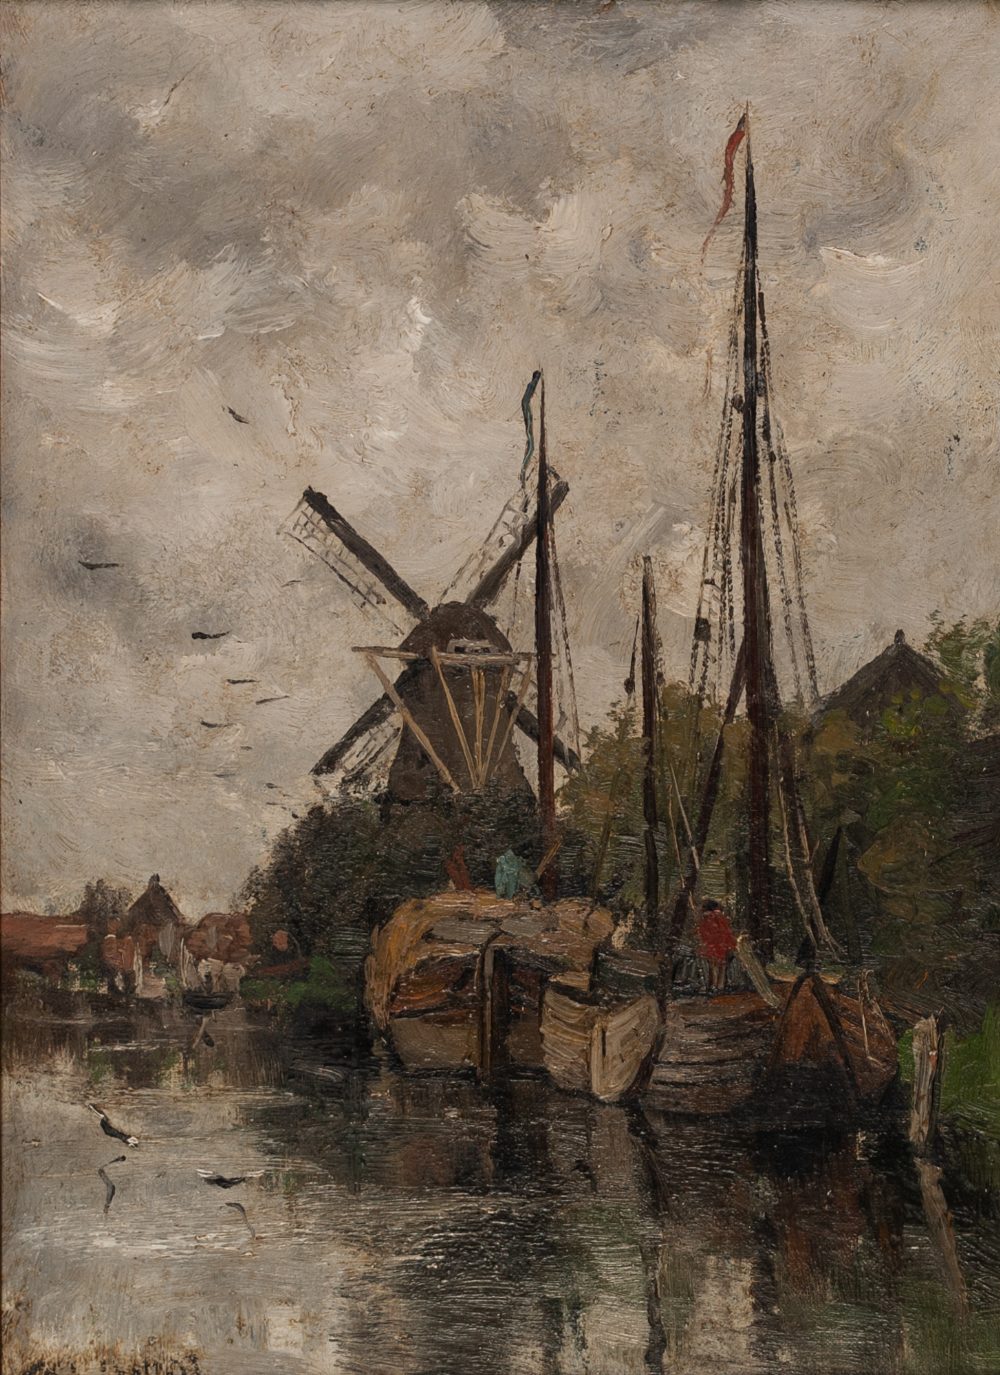 FREDERICUS JACOBUS VAN ROSSUM DU CHATTEL (1856 - 1917) OIL PAINTING ON CANVAS Dutch canal scene with